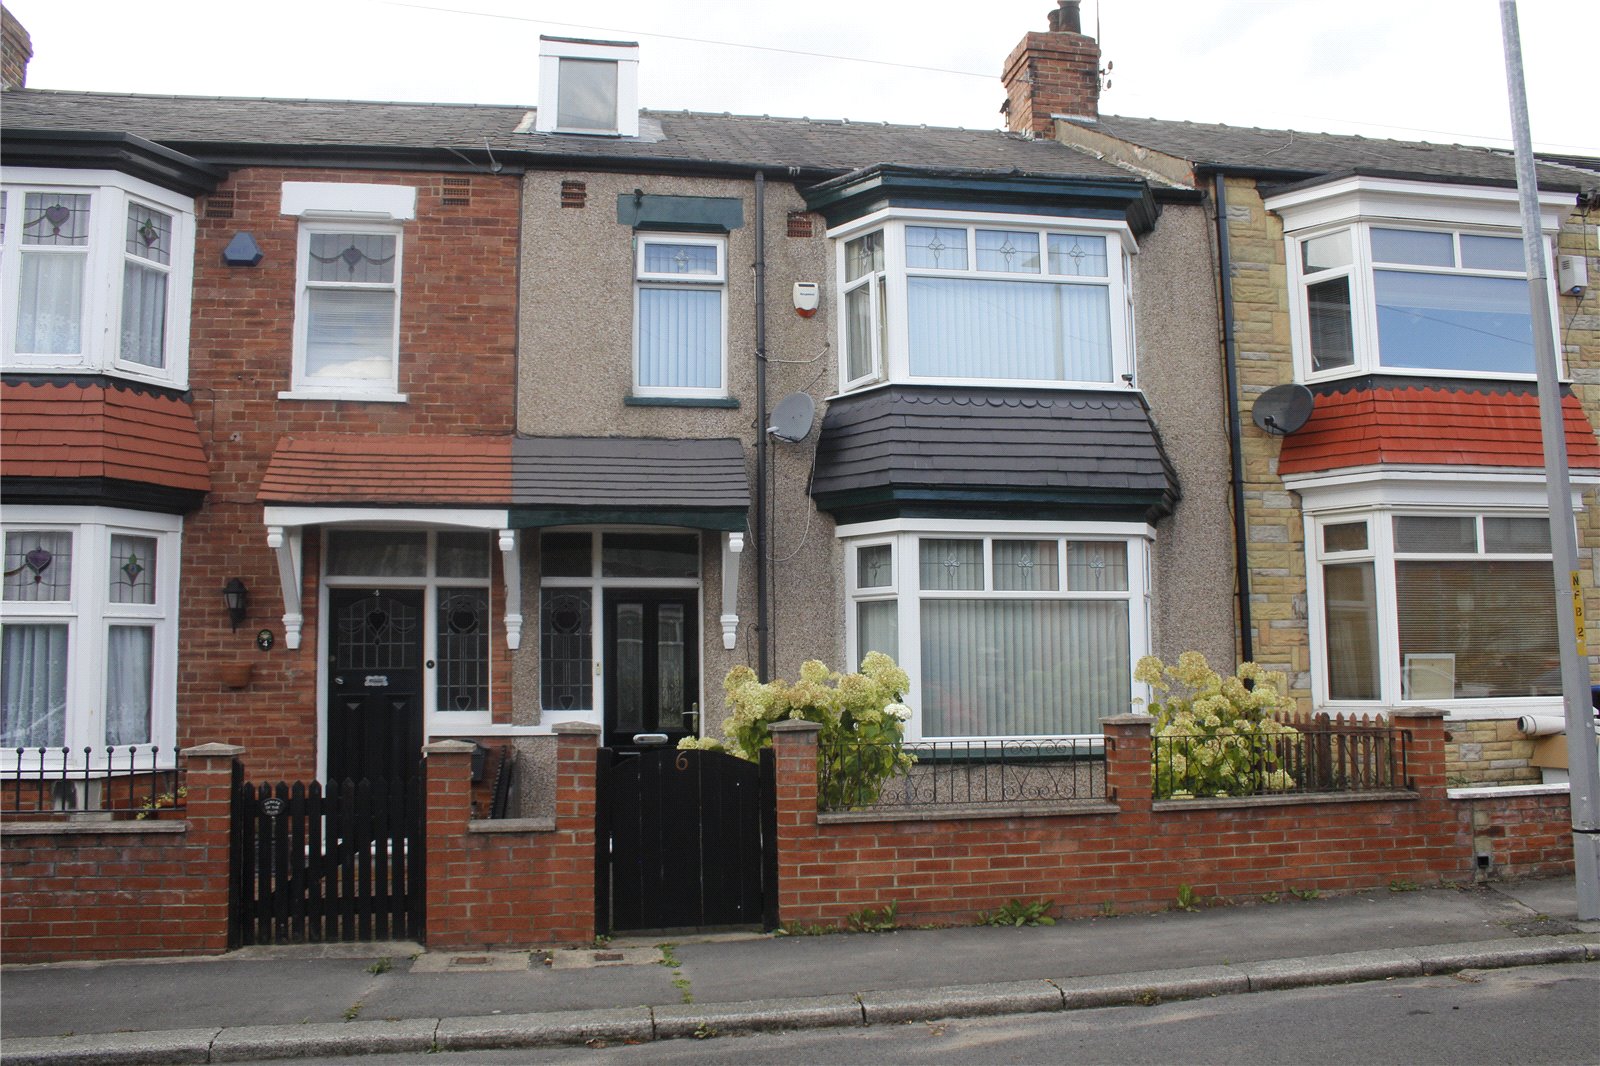 2 bed house for sale in Aysgarth Road, Linthorpe 1